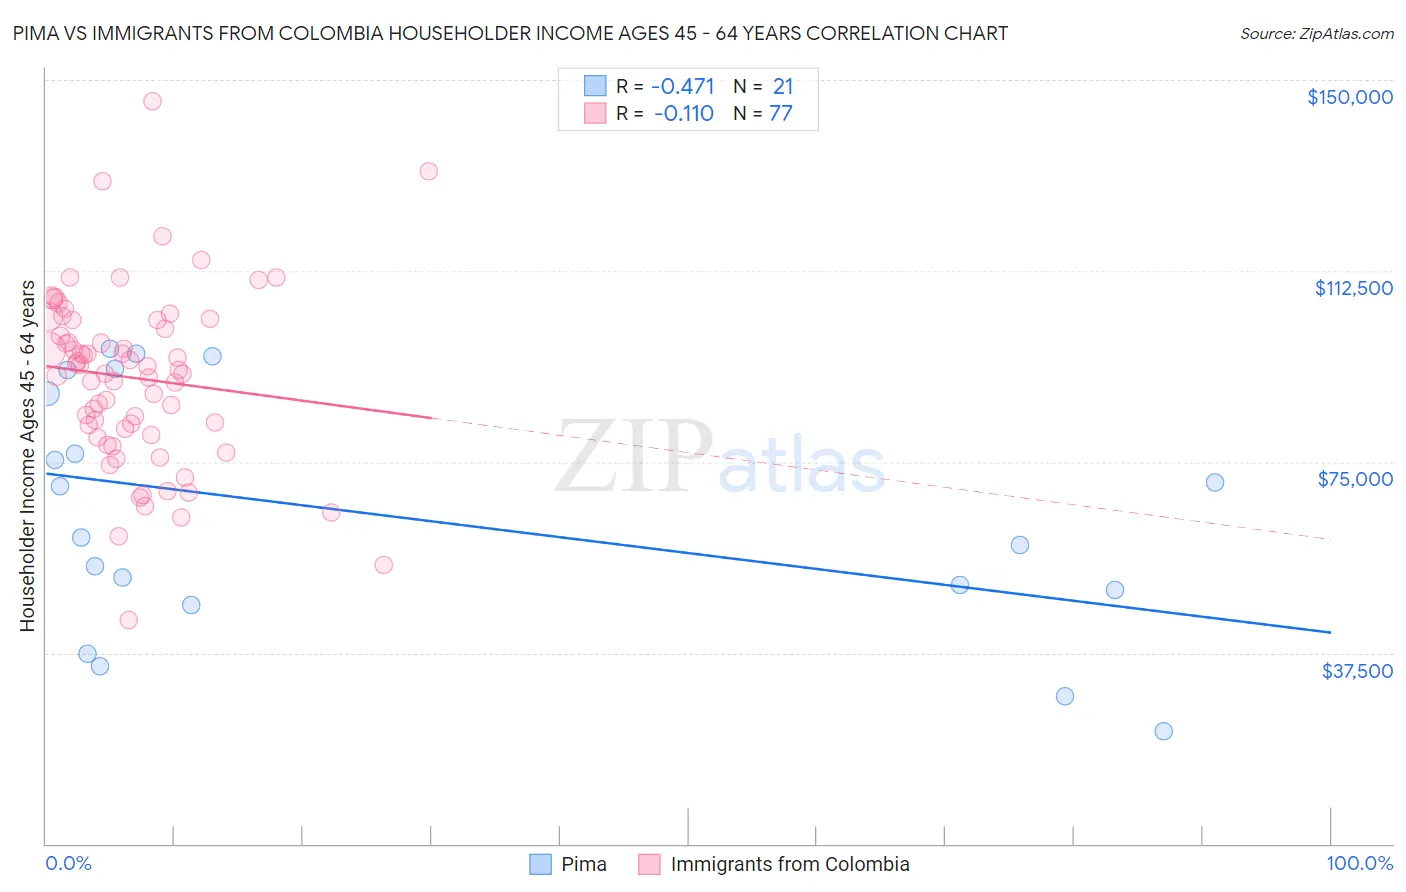 Pima vs Immigrants from Colombia Householder Income Ages 45 - 64 years